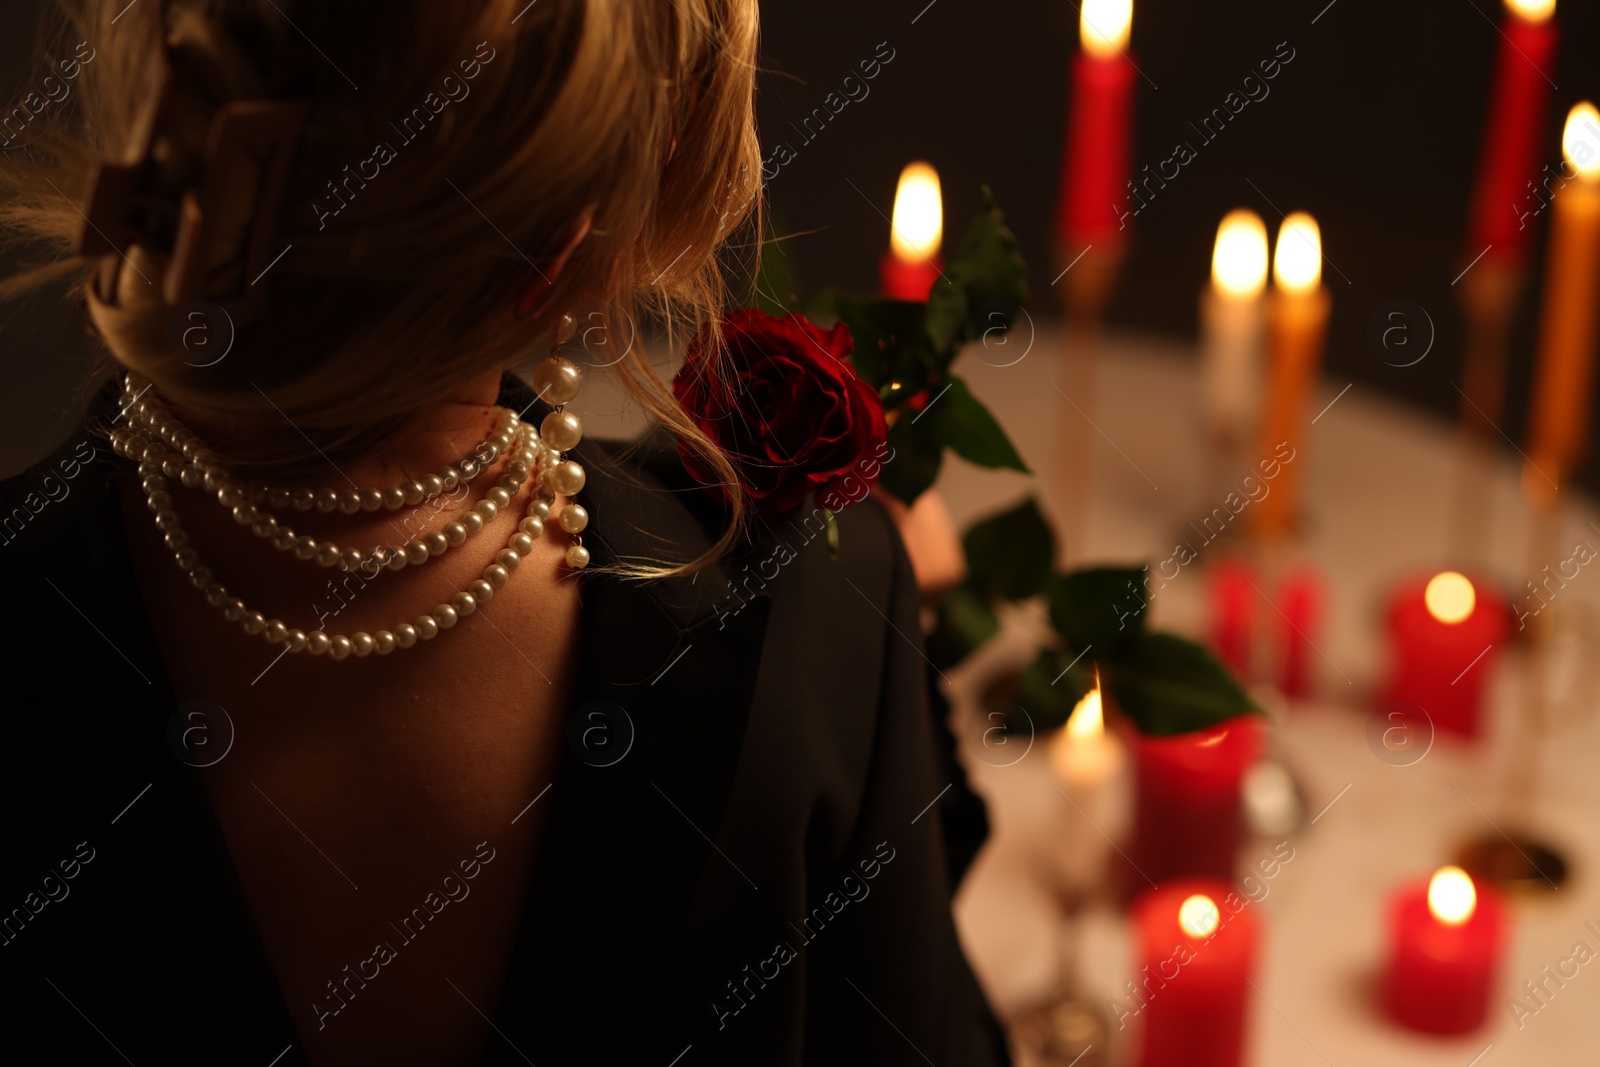 Photo of Woman wearing elegant jewelry near table with burning candles at night, back view